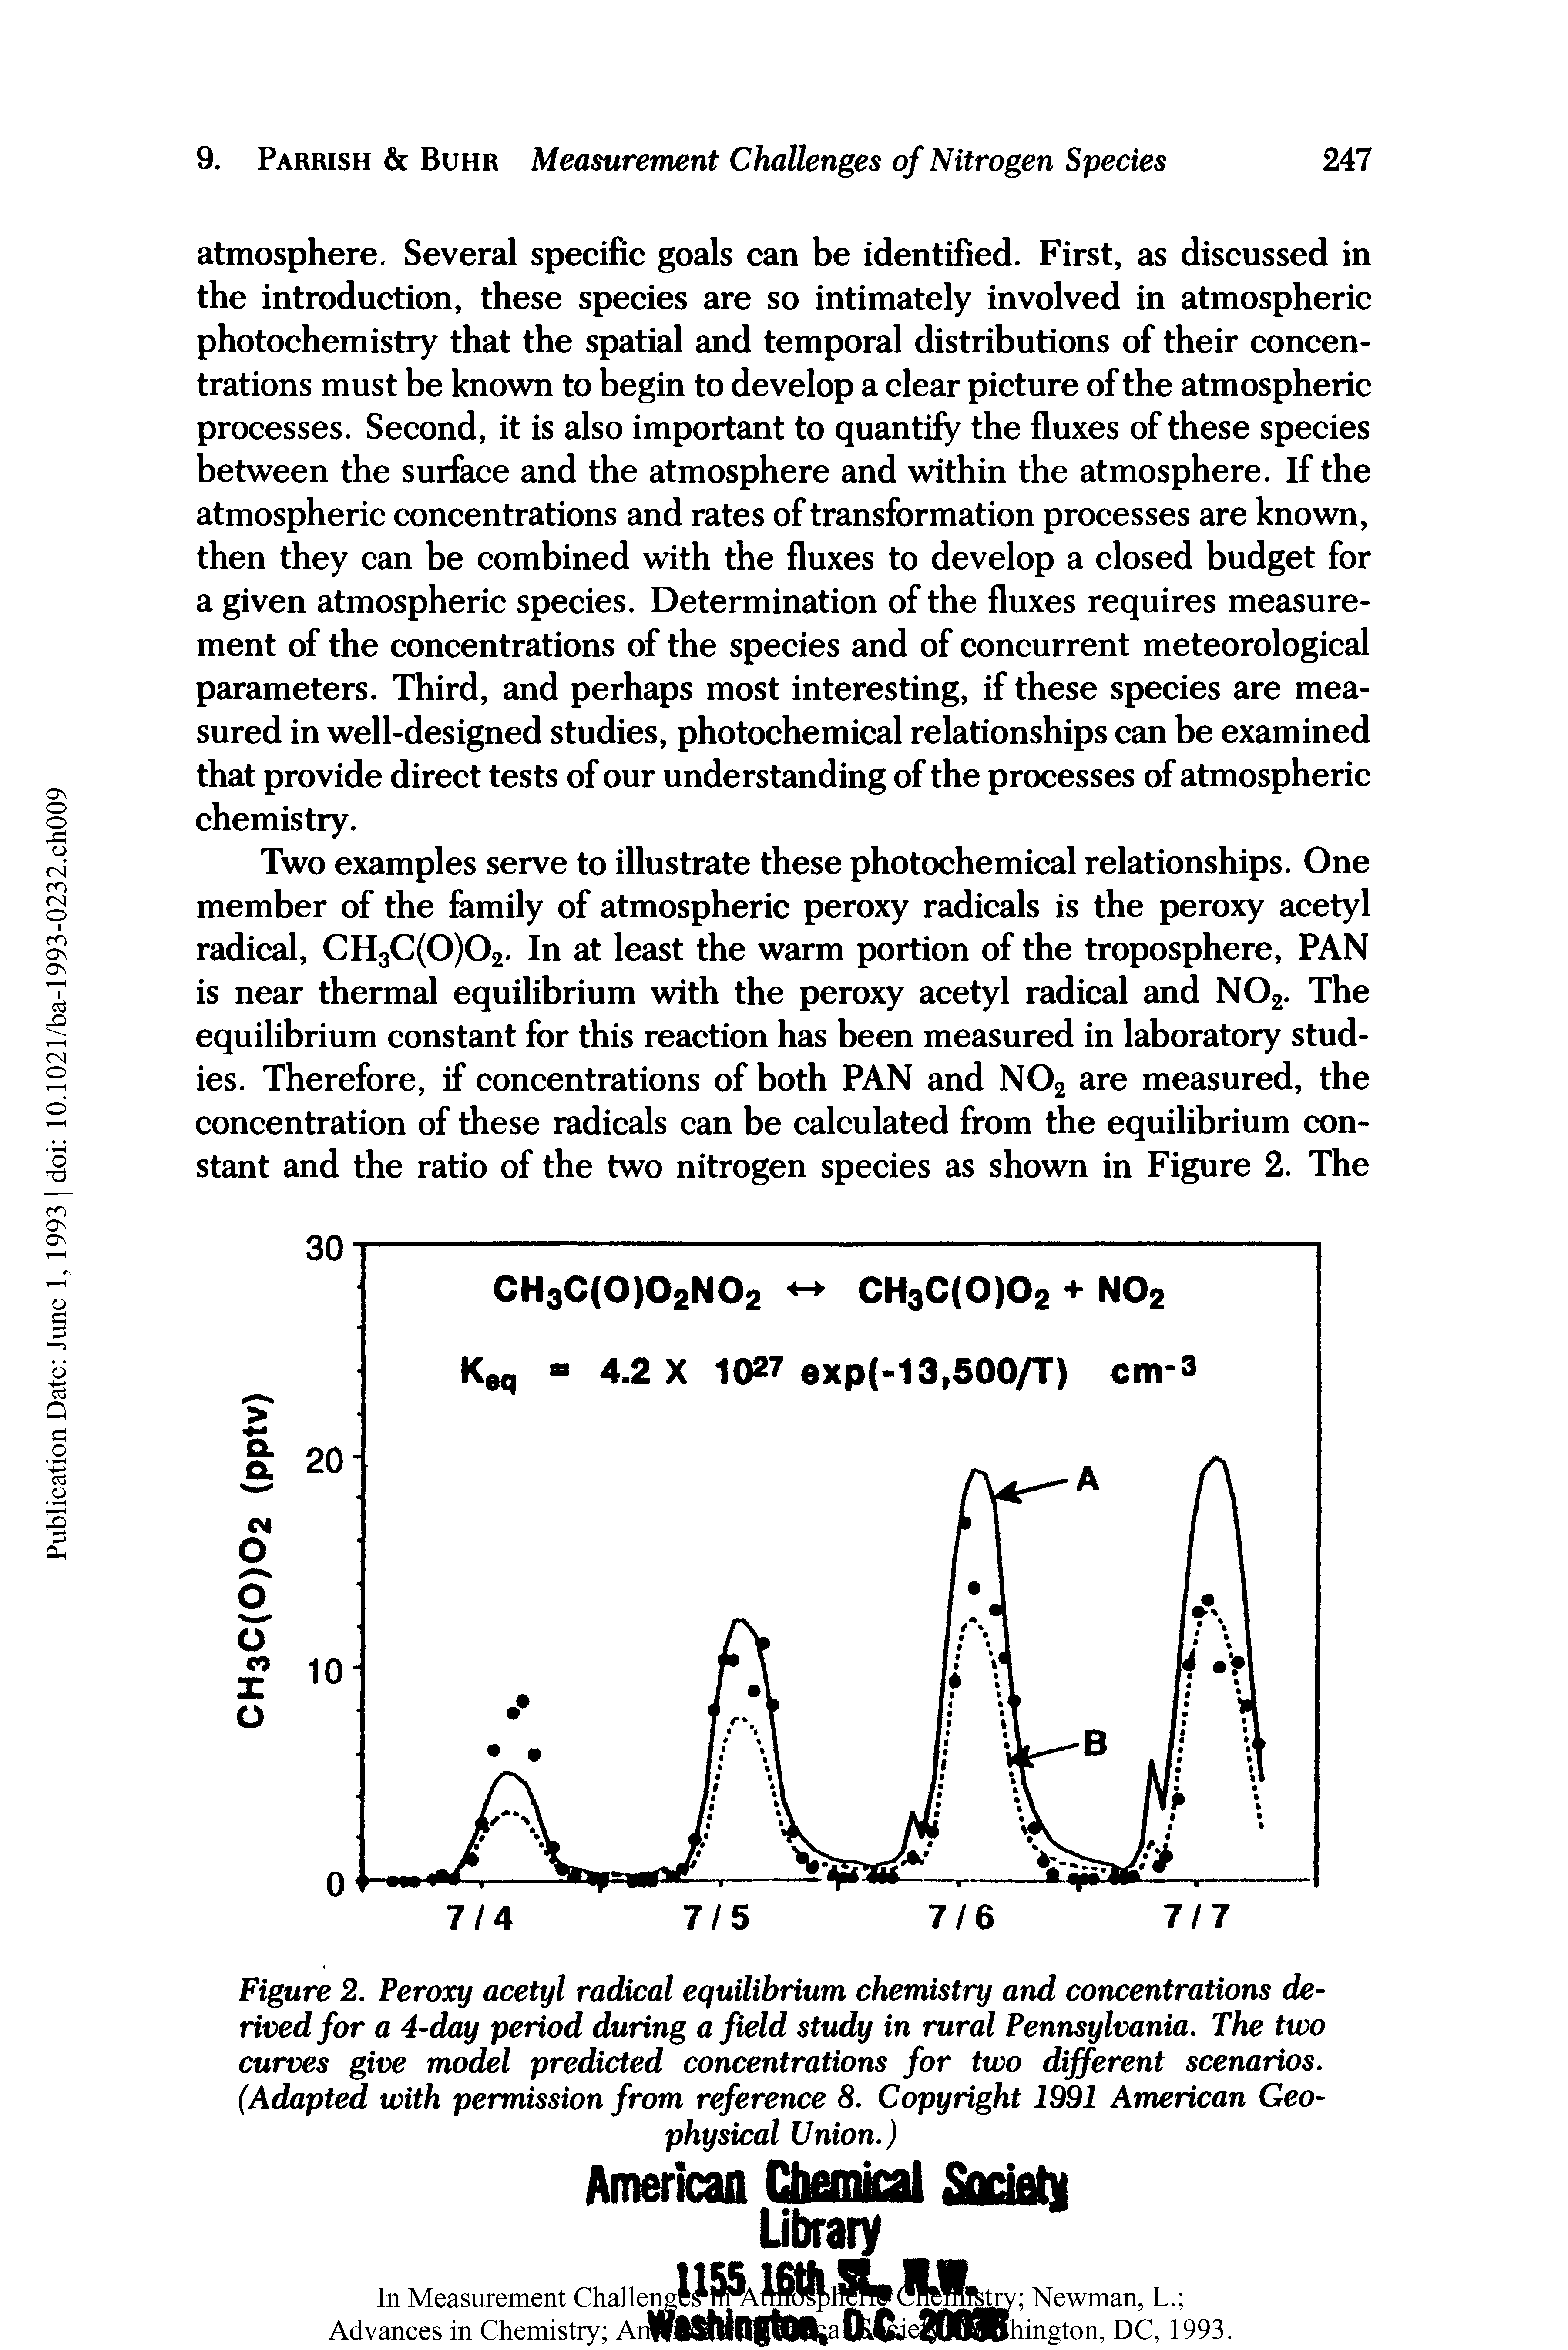 Figure 2. Peroxy acetyl radical equilibrium chemistry and concentrations derived for a 4-day period during afield study in rural Pennsylvania. The two curves give model predicted concentrations for two different scenarios. (Adapted with permission from reference 8. Copyright 1991 American Geophysical Union.)...